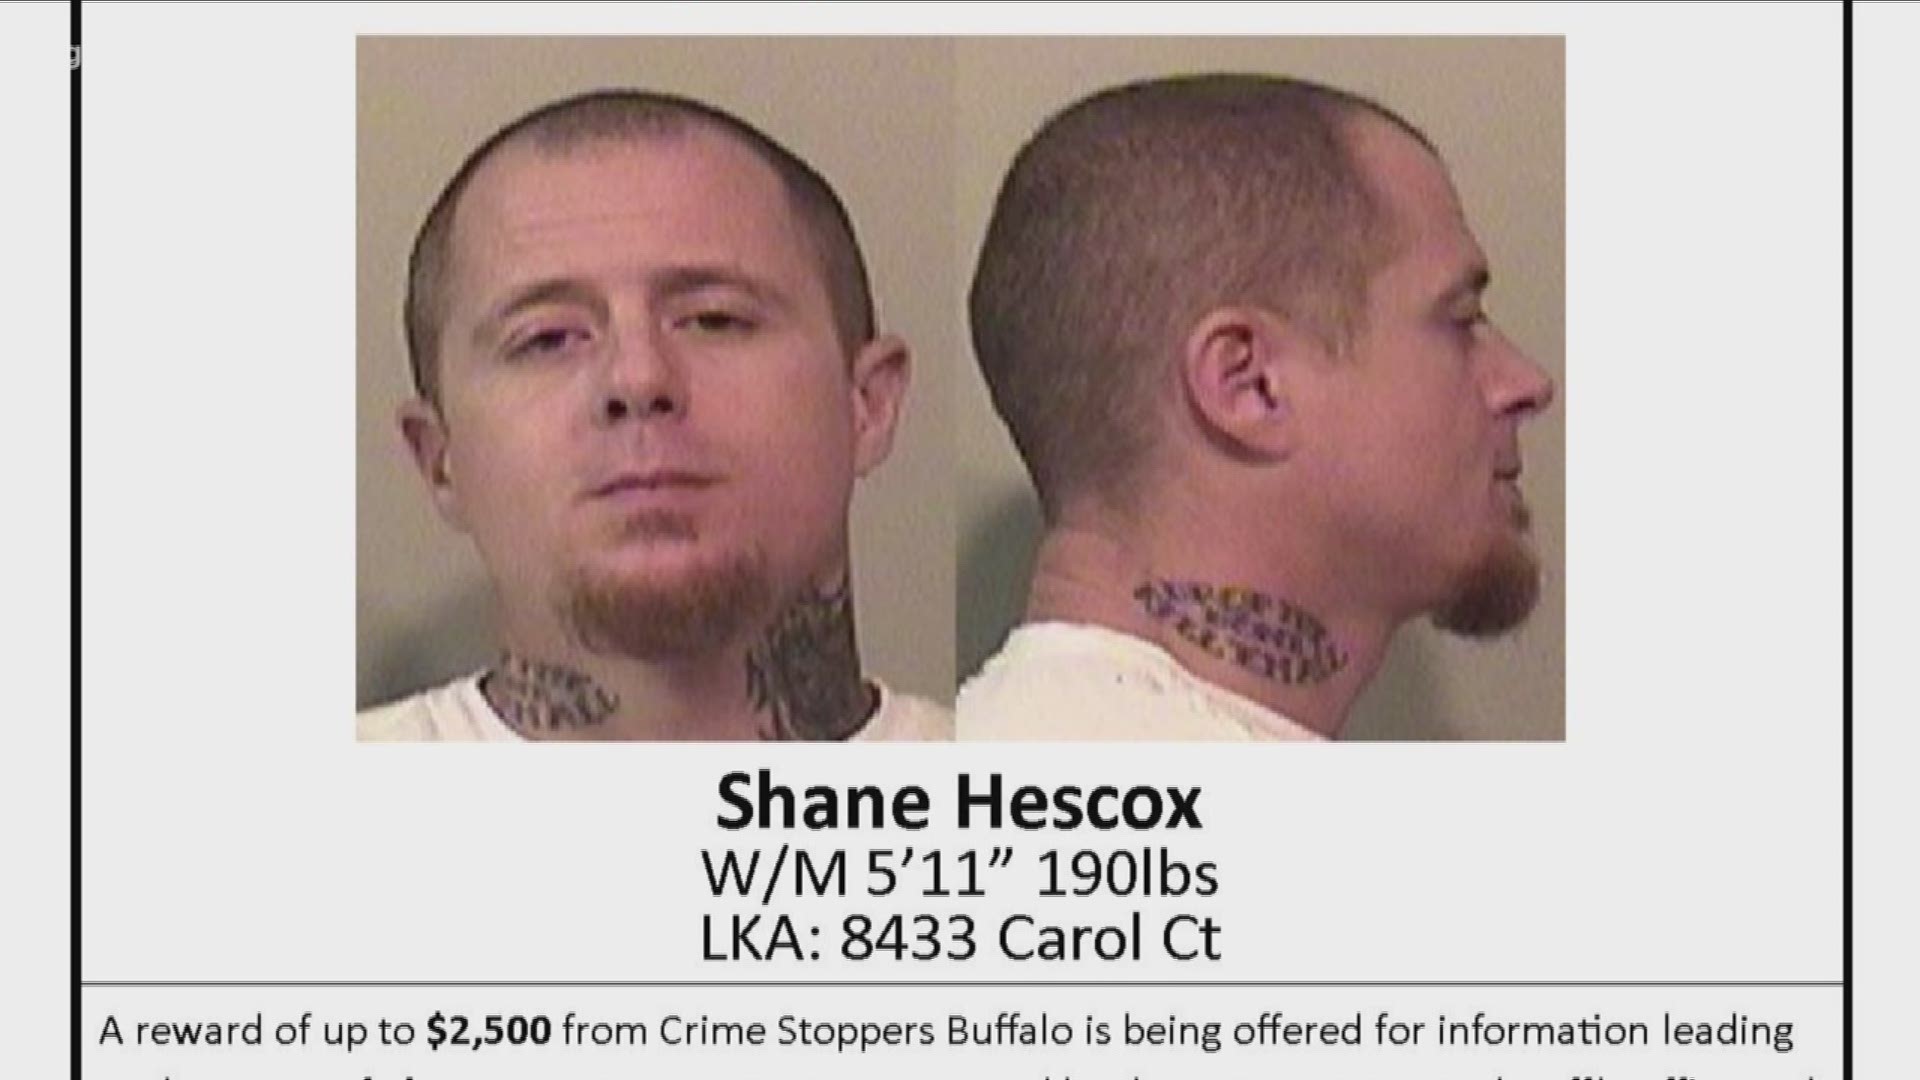 CRIMESTOPPERS IS OFFERING A 25-HUNDRED DOLLAR REWARD FOR ANY INFORMATION LEADING TO HIS ARREST.